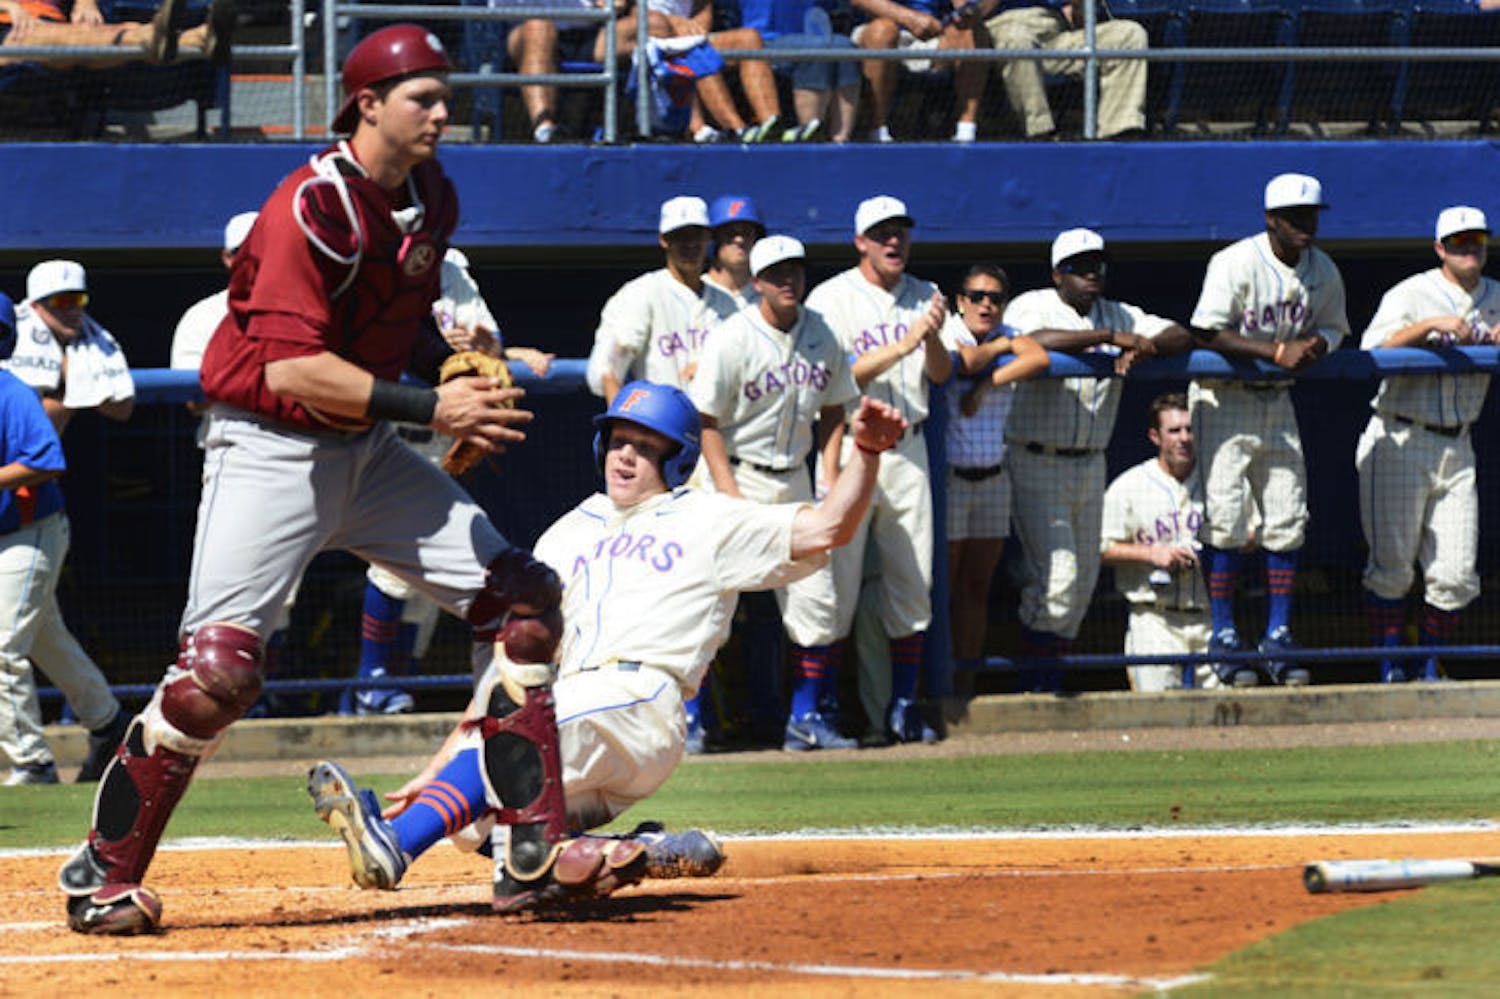 Harrison Bader slides into home during Florida’s 14-5 win against South Carolina on April 13, 2013. Bader and the Gators will look to sweep Georgia in their final matchup Sunday at noon.